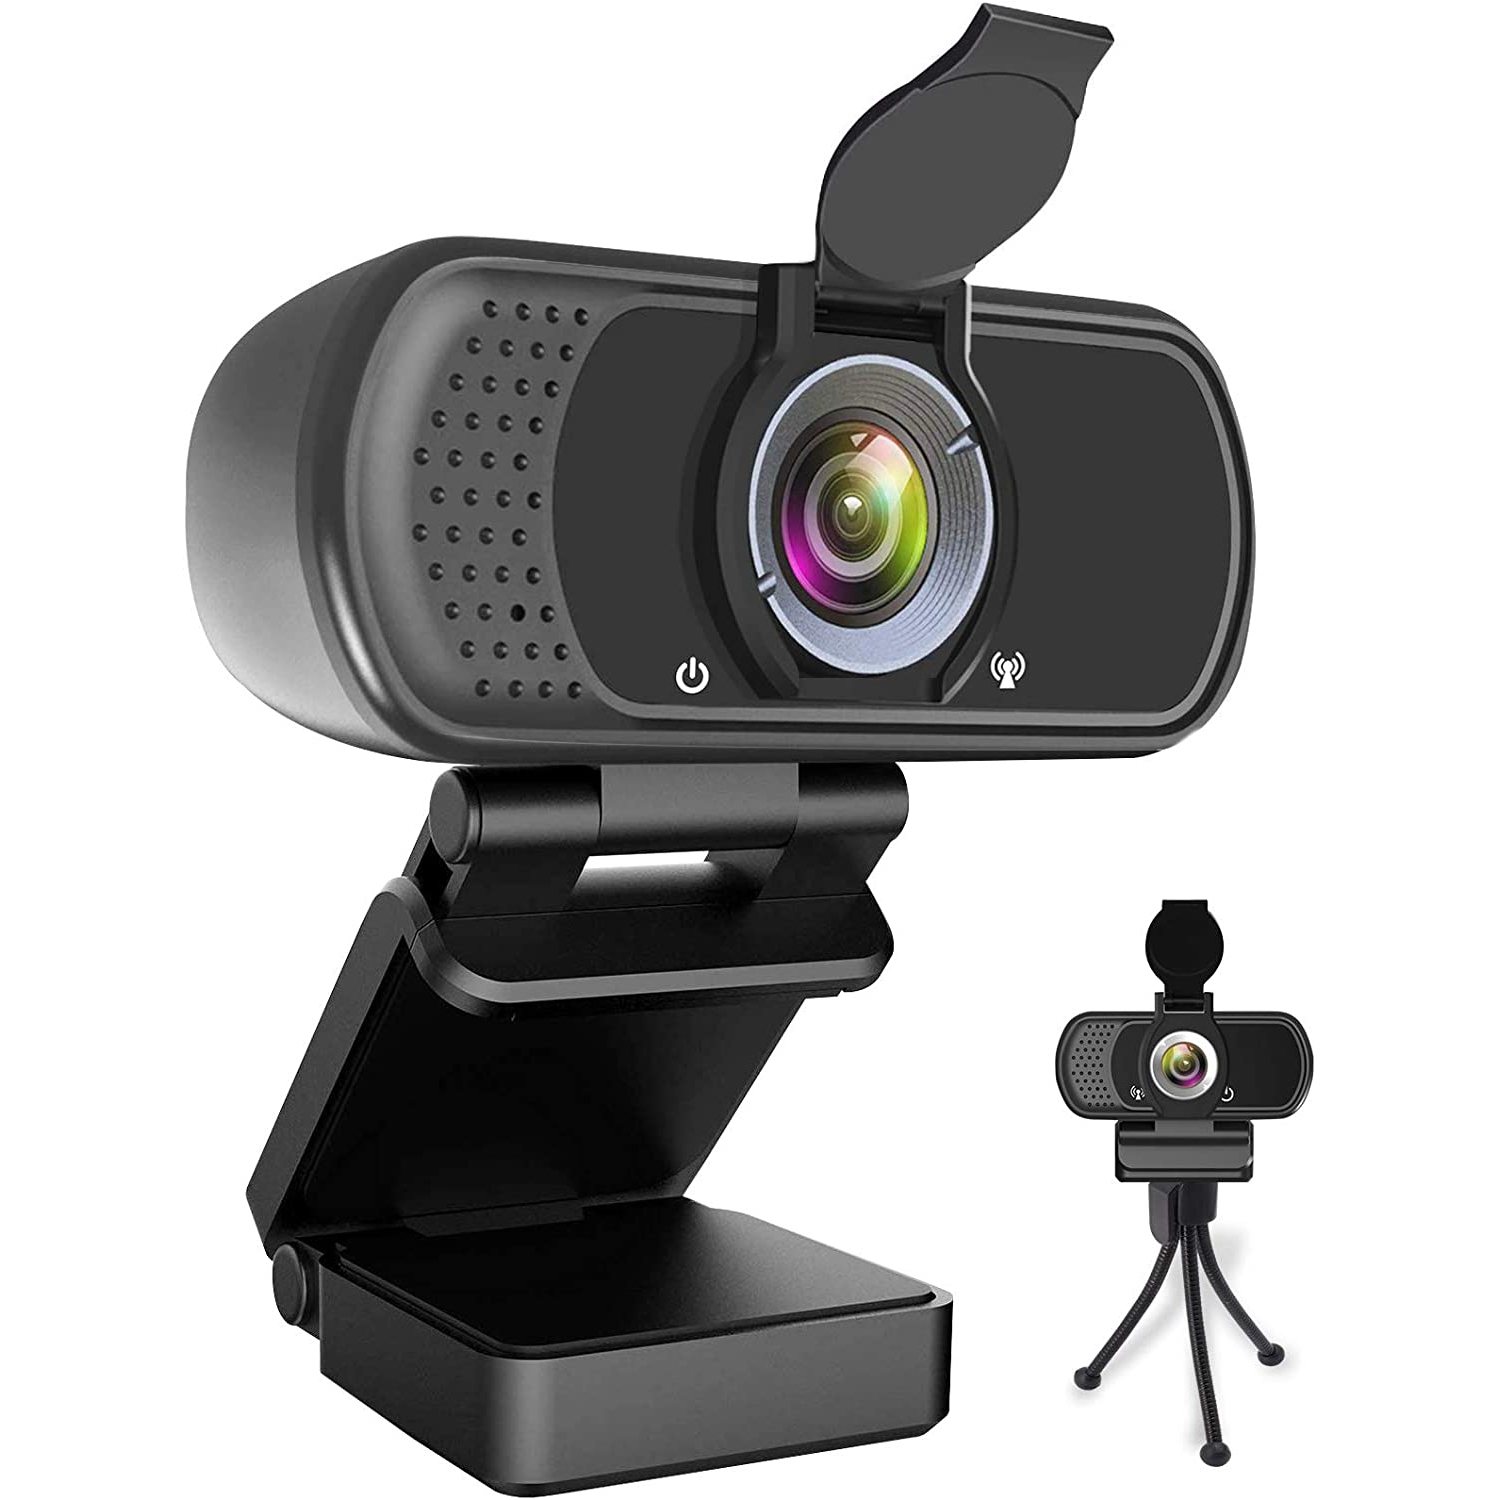 Webcam HD 1080P,Webcam with Microphone, USB Desktop Laptop Camera with 110 Degree Widescreen,Stream Webcam for Calling, Recording,Conferencing, Gaming,Webcam with Privacy Shutter